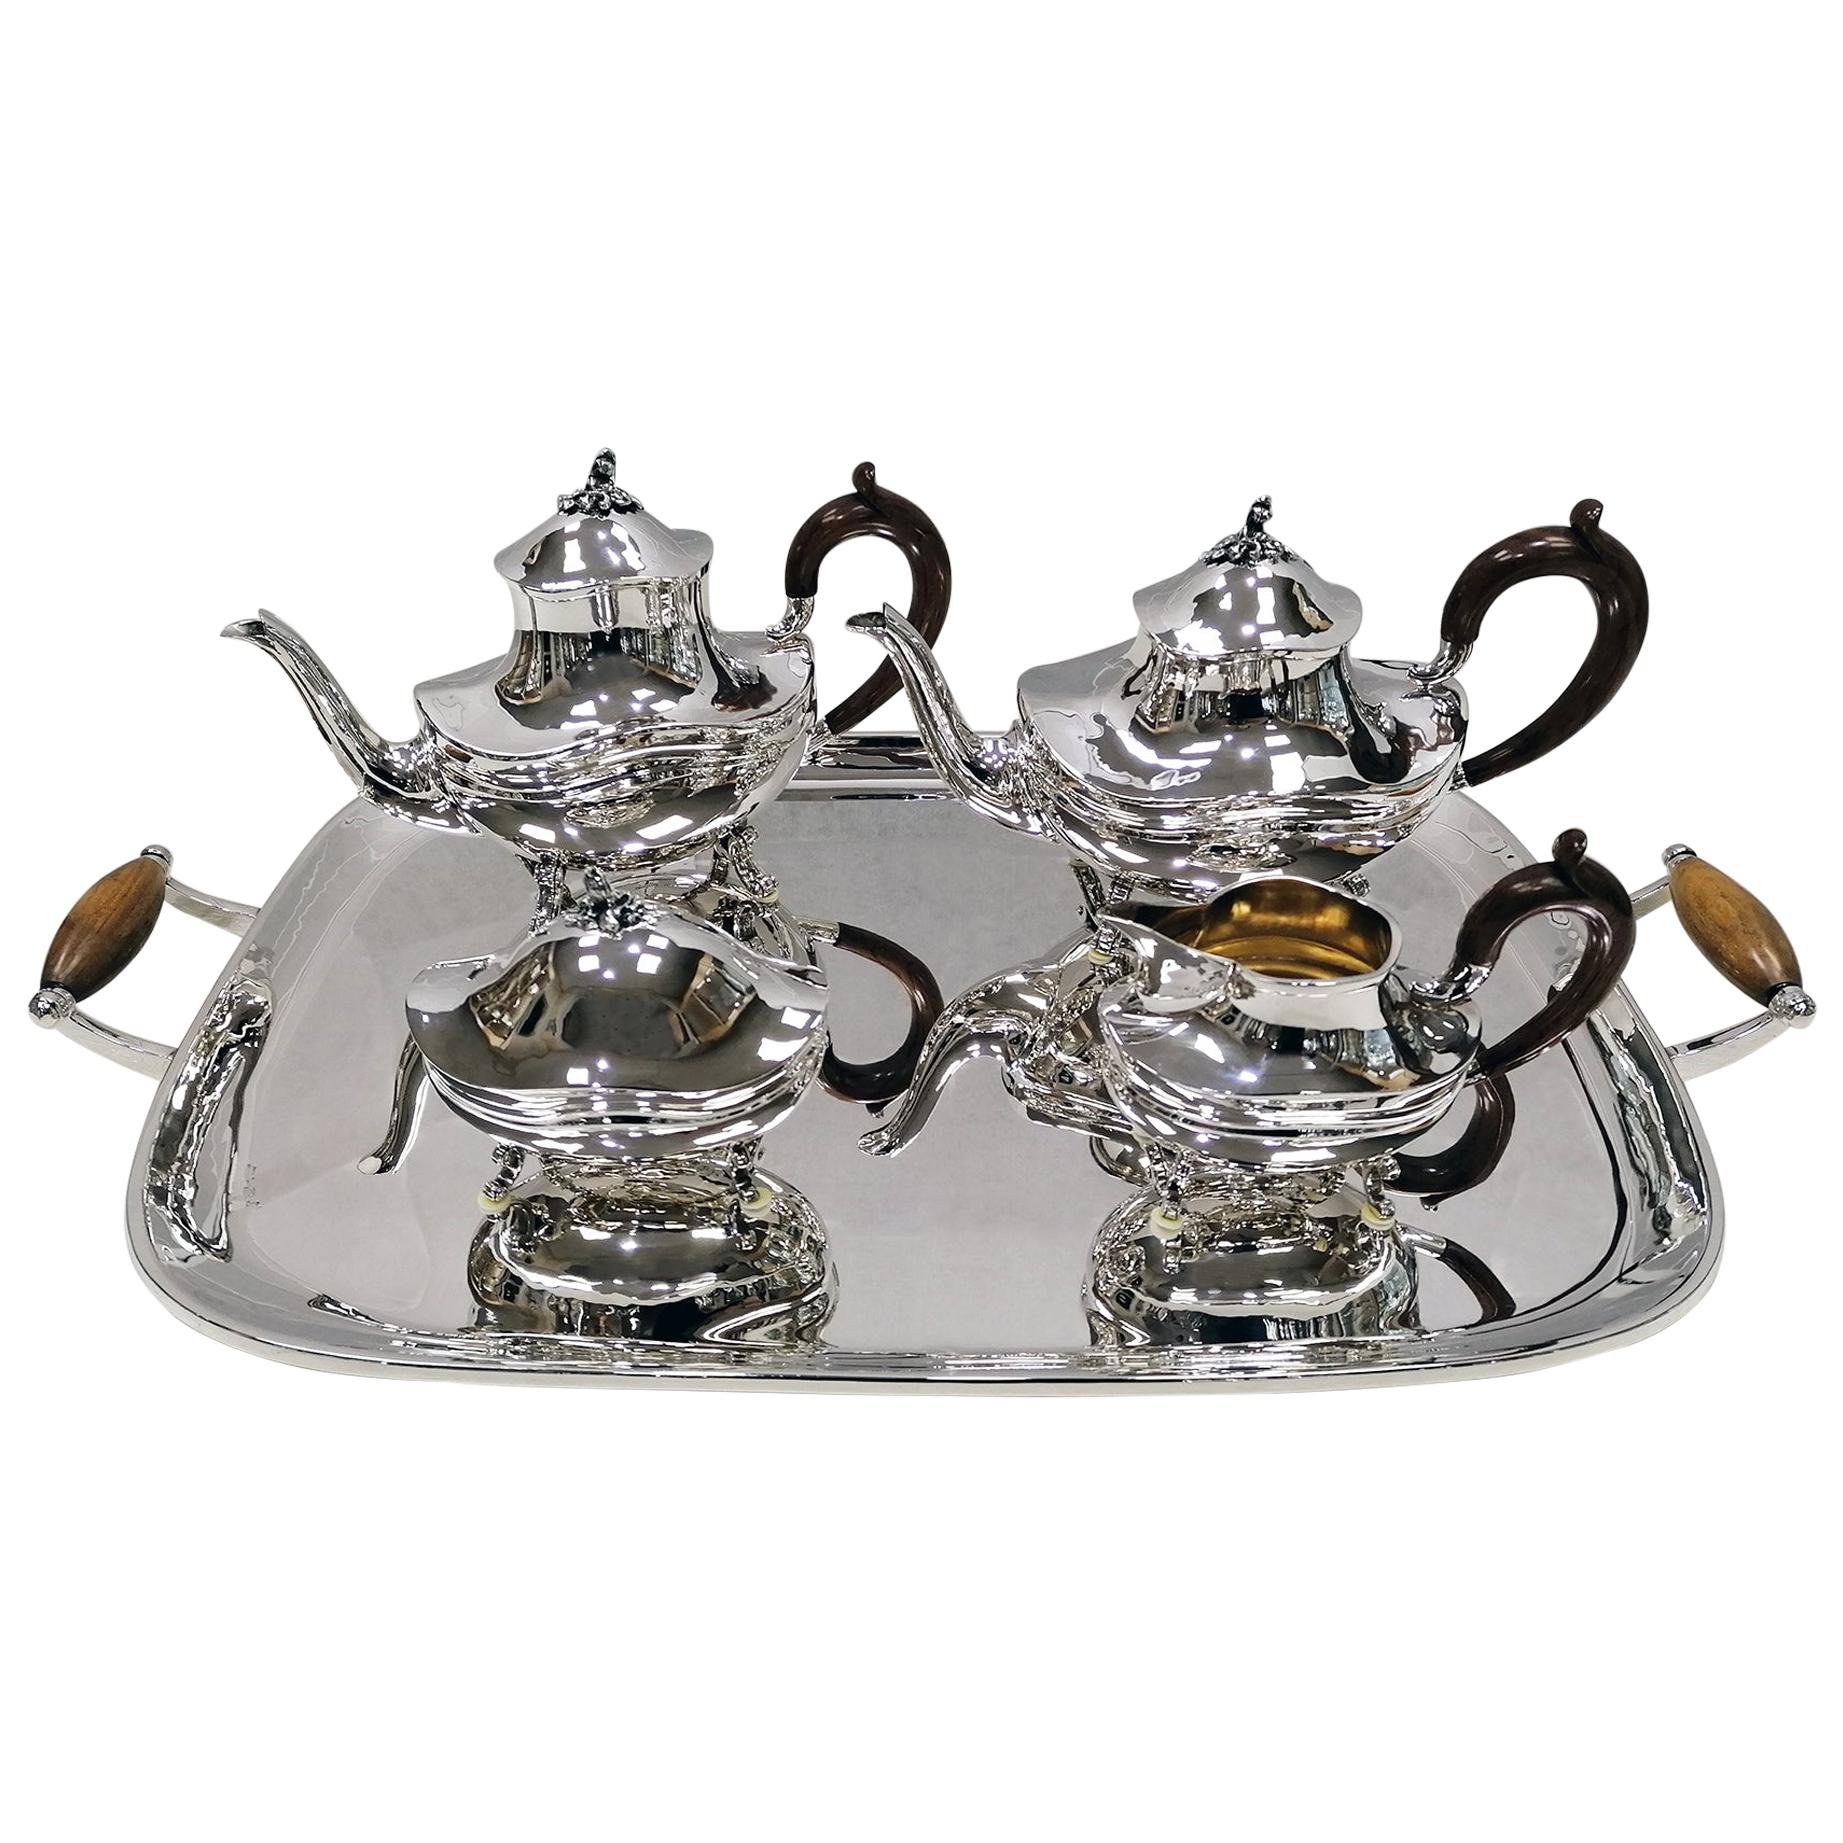 20th Century Italian Solid Silver Tea and Coffee Set with Matching Tray